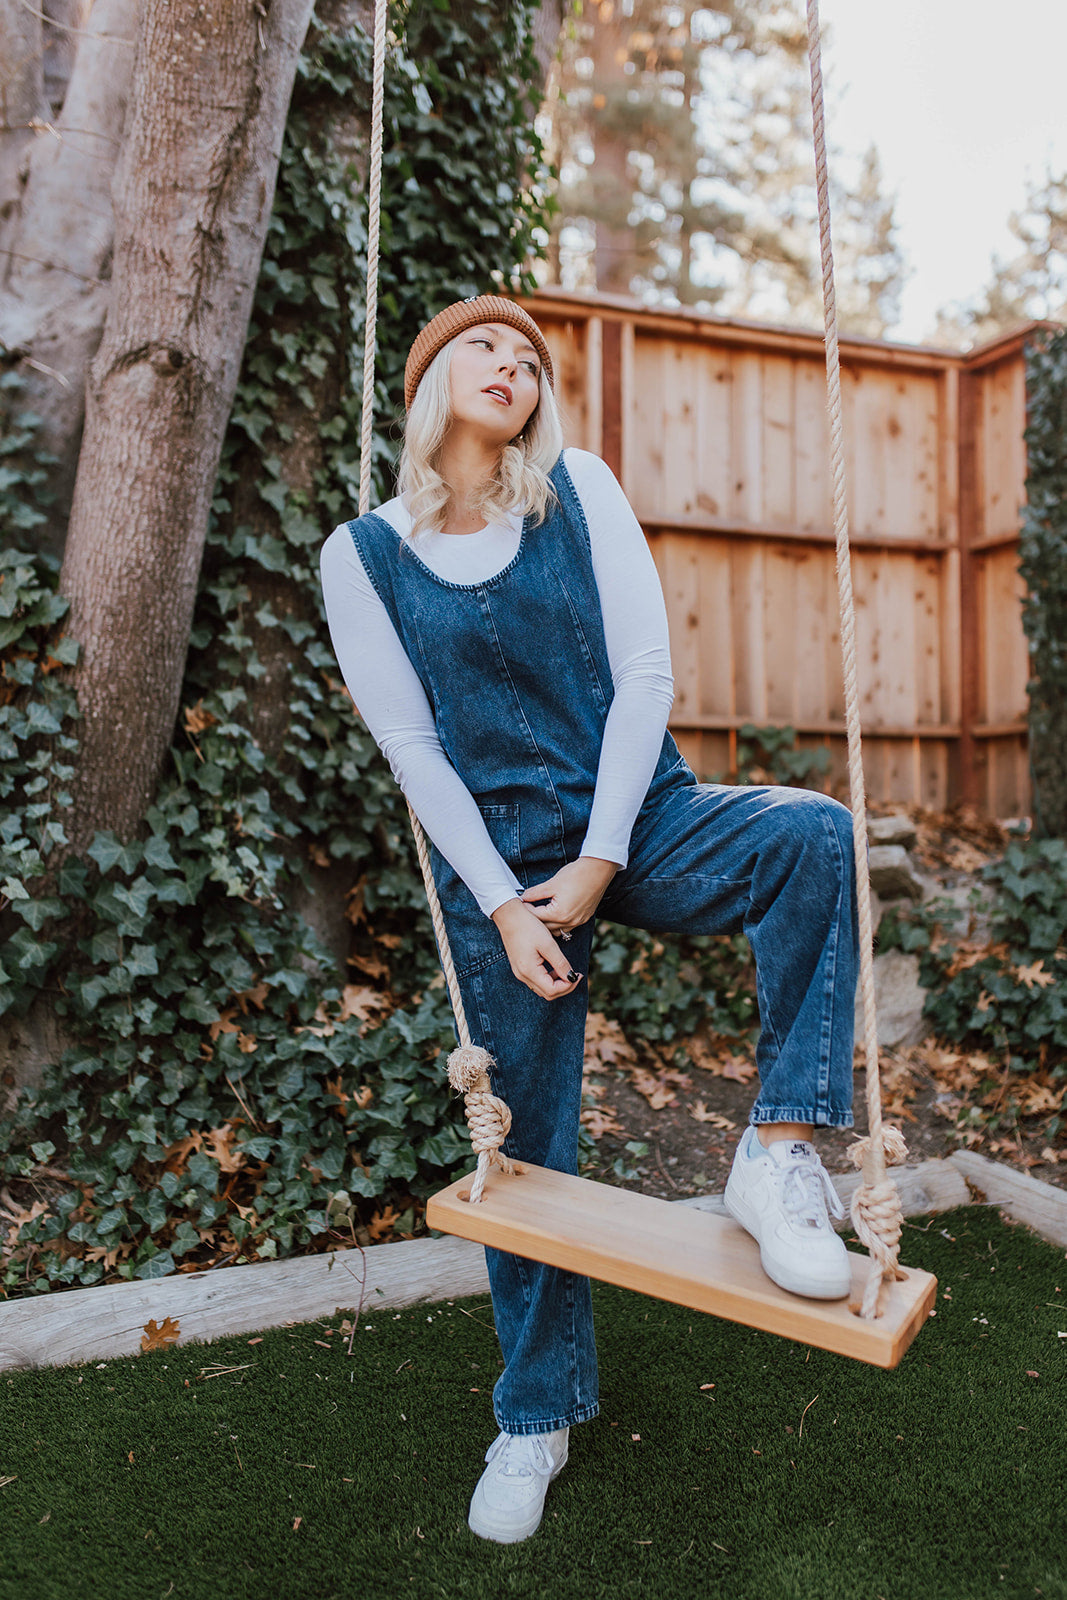 Whimsy + Row Grace Organic Cotton Denim Jumpsuit | Urban Outfitters